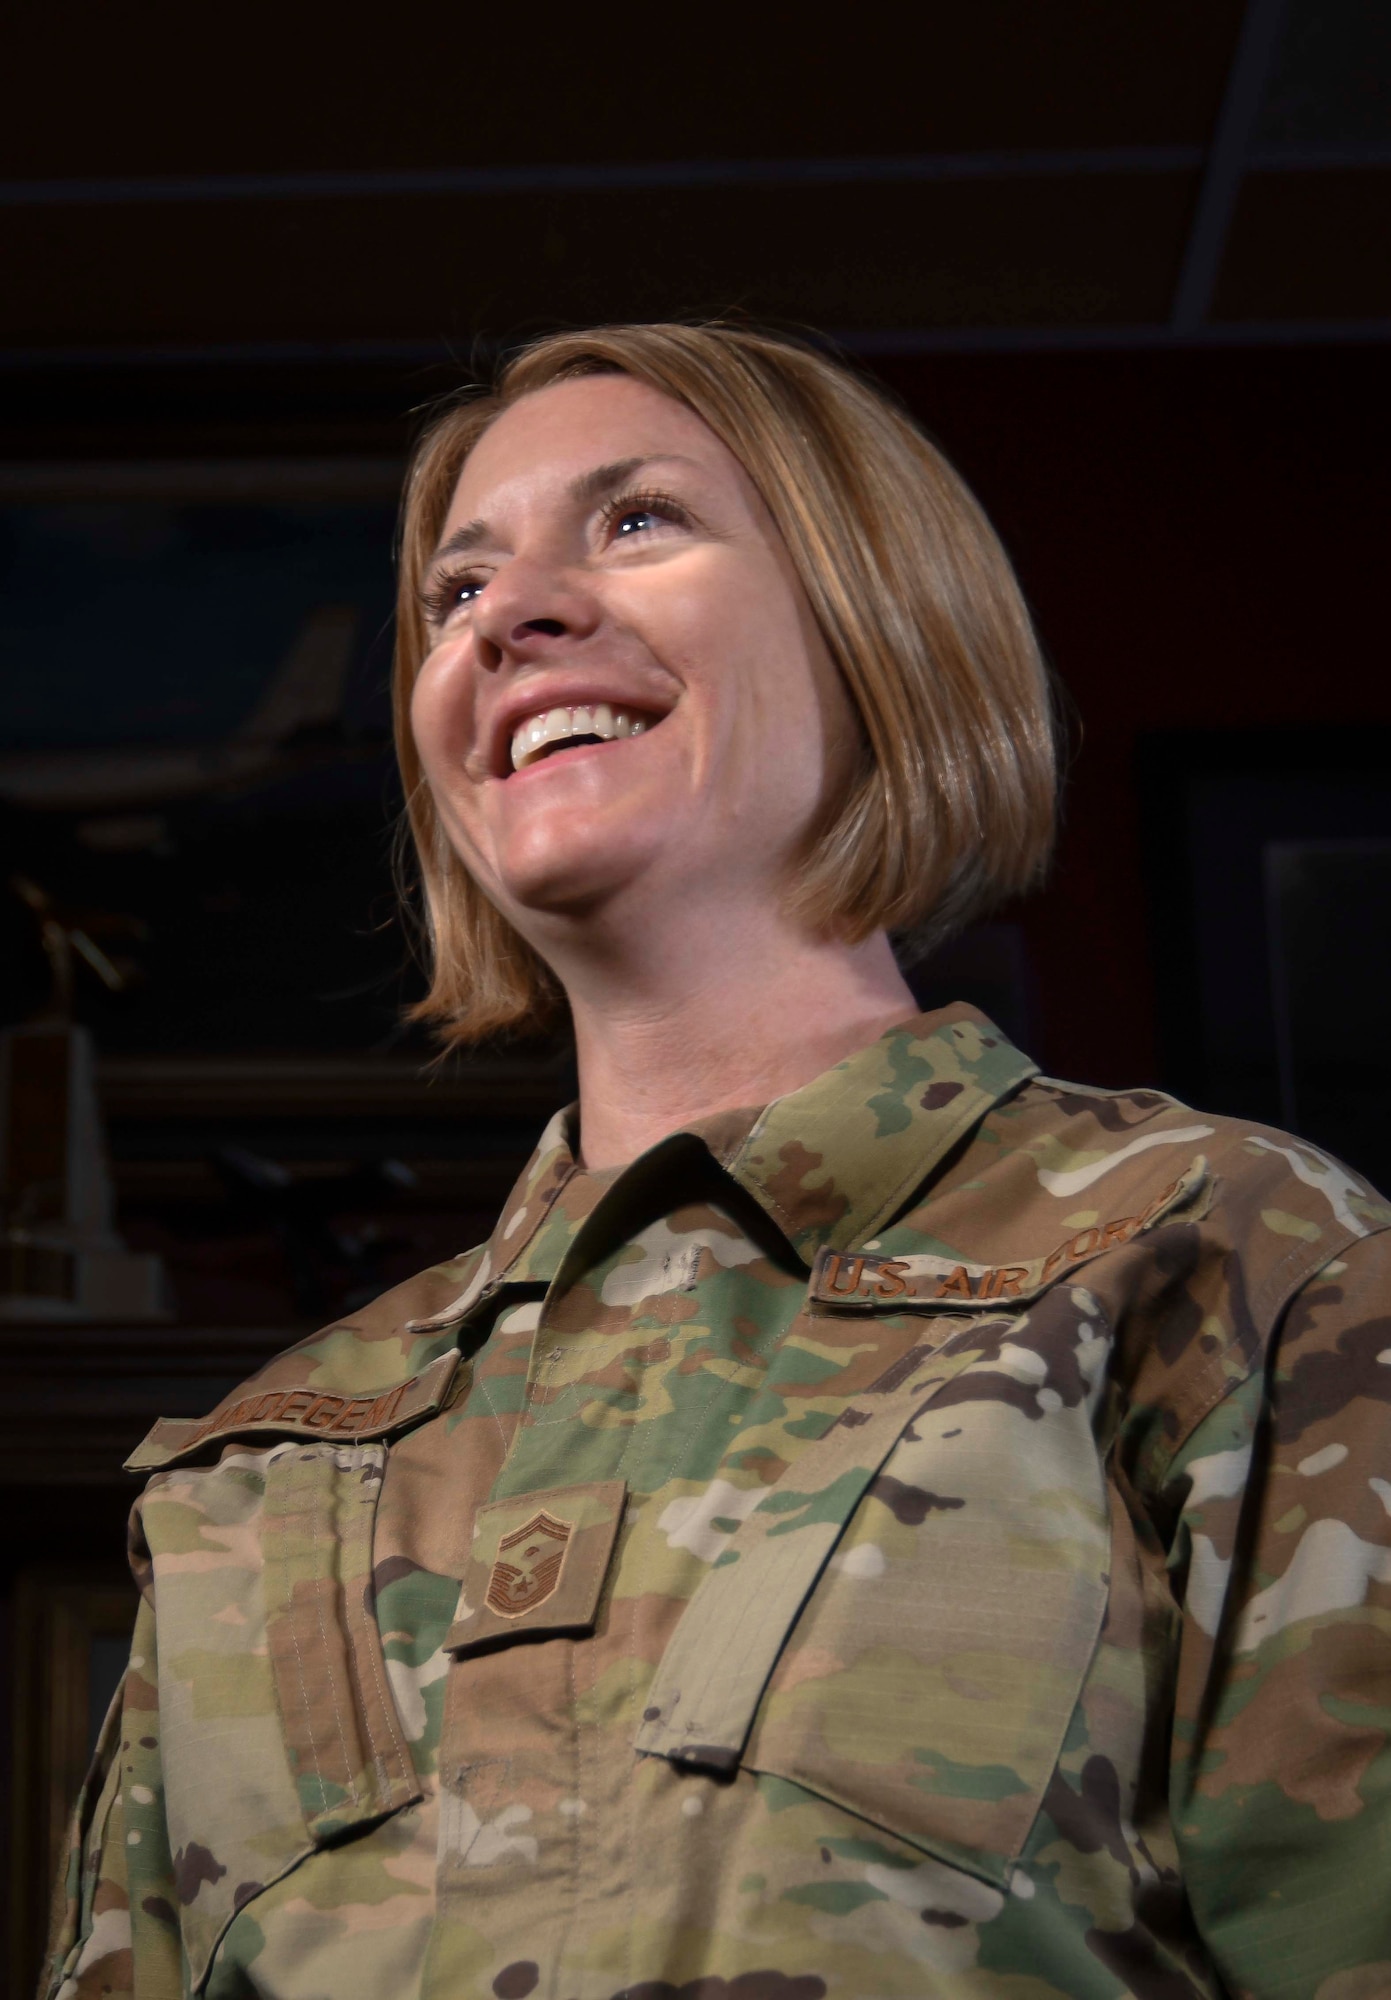 U.S. Air Force 1st Sgt. Rachel L. Landegent, the wing staff and operations group first sergeant with the 161st Air Refueling Wing, Arizona Air National Guard, poses for her Air National Guard 2019 Outstanding First Sergeant of the Year portrait in Phoenix, Ariz., July 2, 2019. Landegent was recognized for her dedication toward supporting Airmen in both their professional and personal lives. (Air National Guard photo by Staff Sgt. Morgan R. Lipinski)